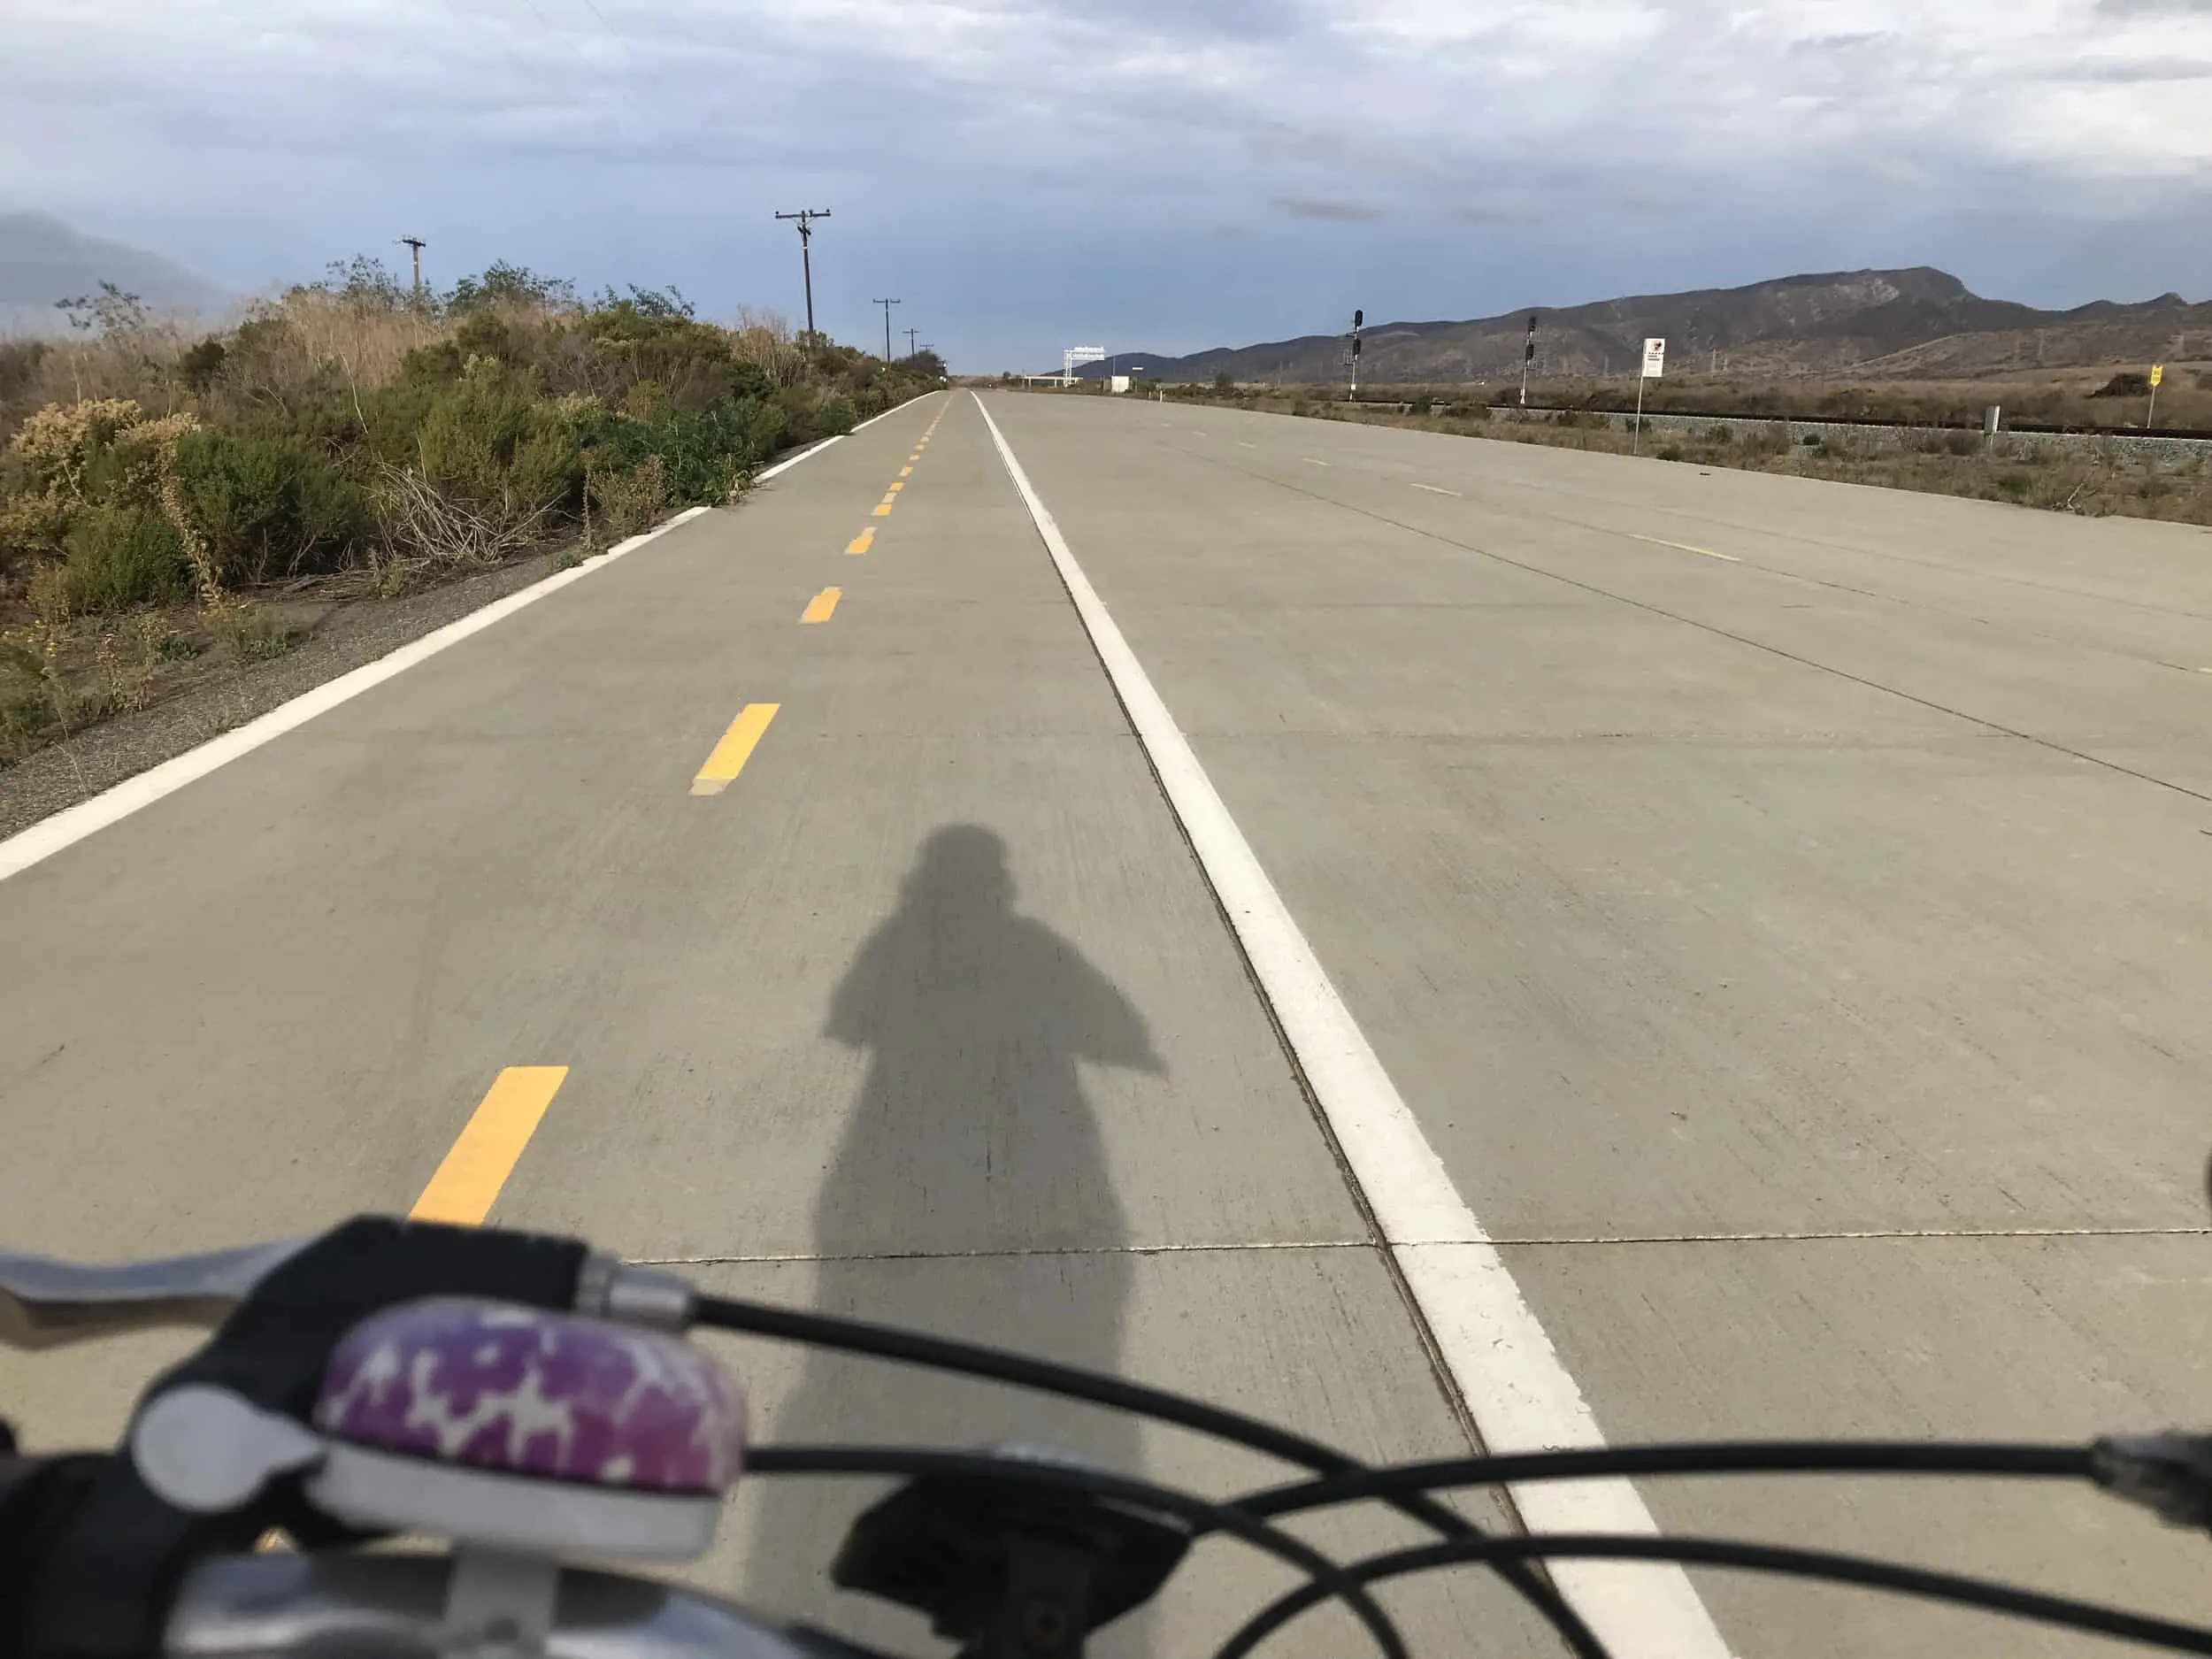 a paved bike lane running next to the Pacific Ocean in a desert brush landscape. brown bushes and mountains and grass. cloudy sky. Meggie's shadow can be seen from her bike. Her bike's handlebars are shown. Las Pulgas/Old Pacific Highway Trail nearby Oceanside and San Clemente, California, United States of America